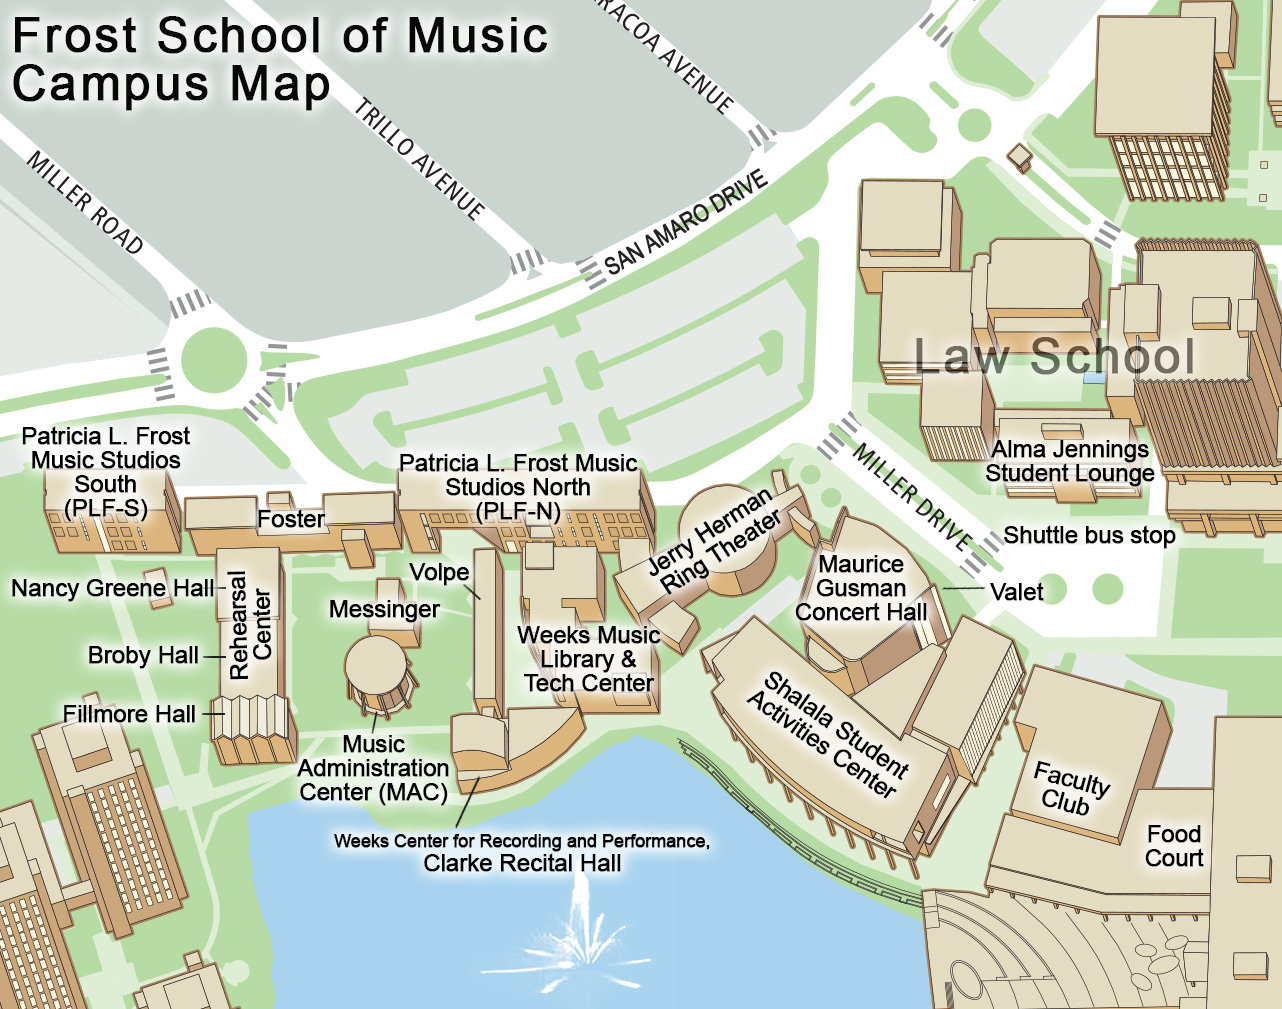 Map of the Frost School of Music Buildings